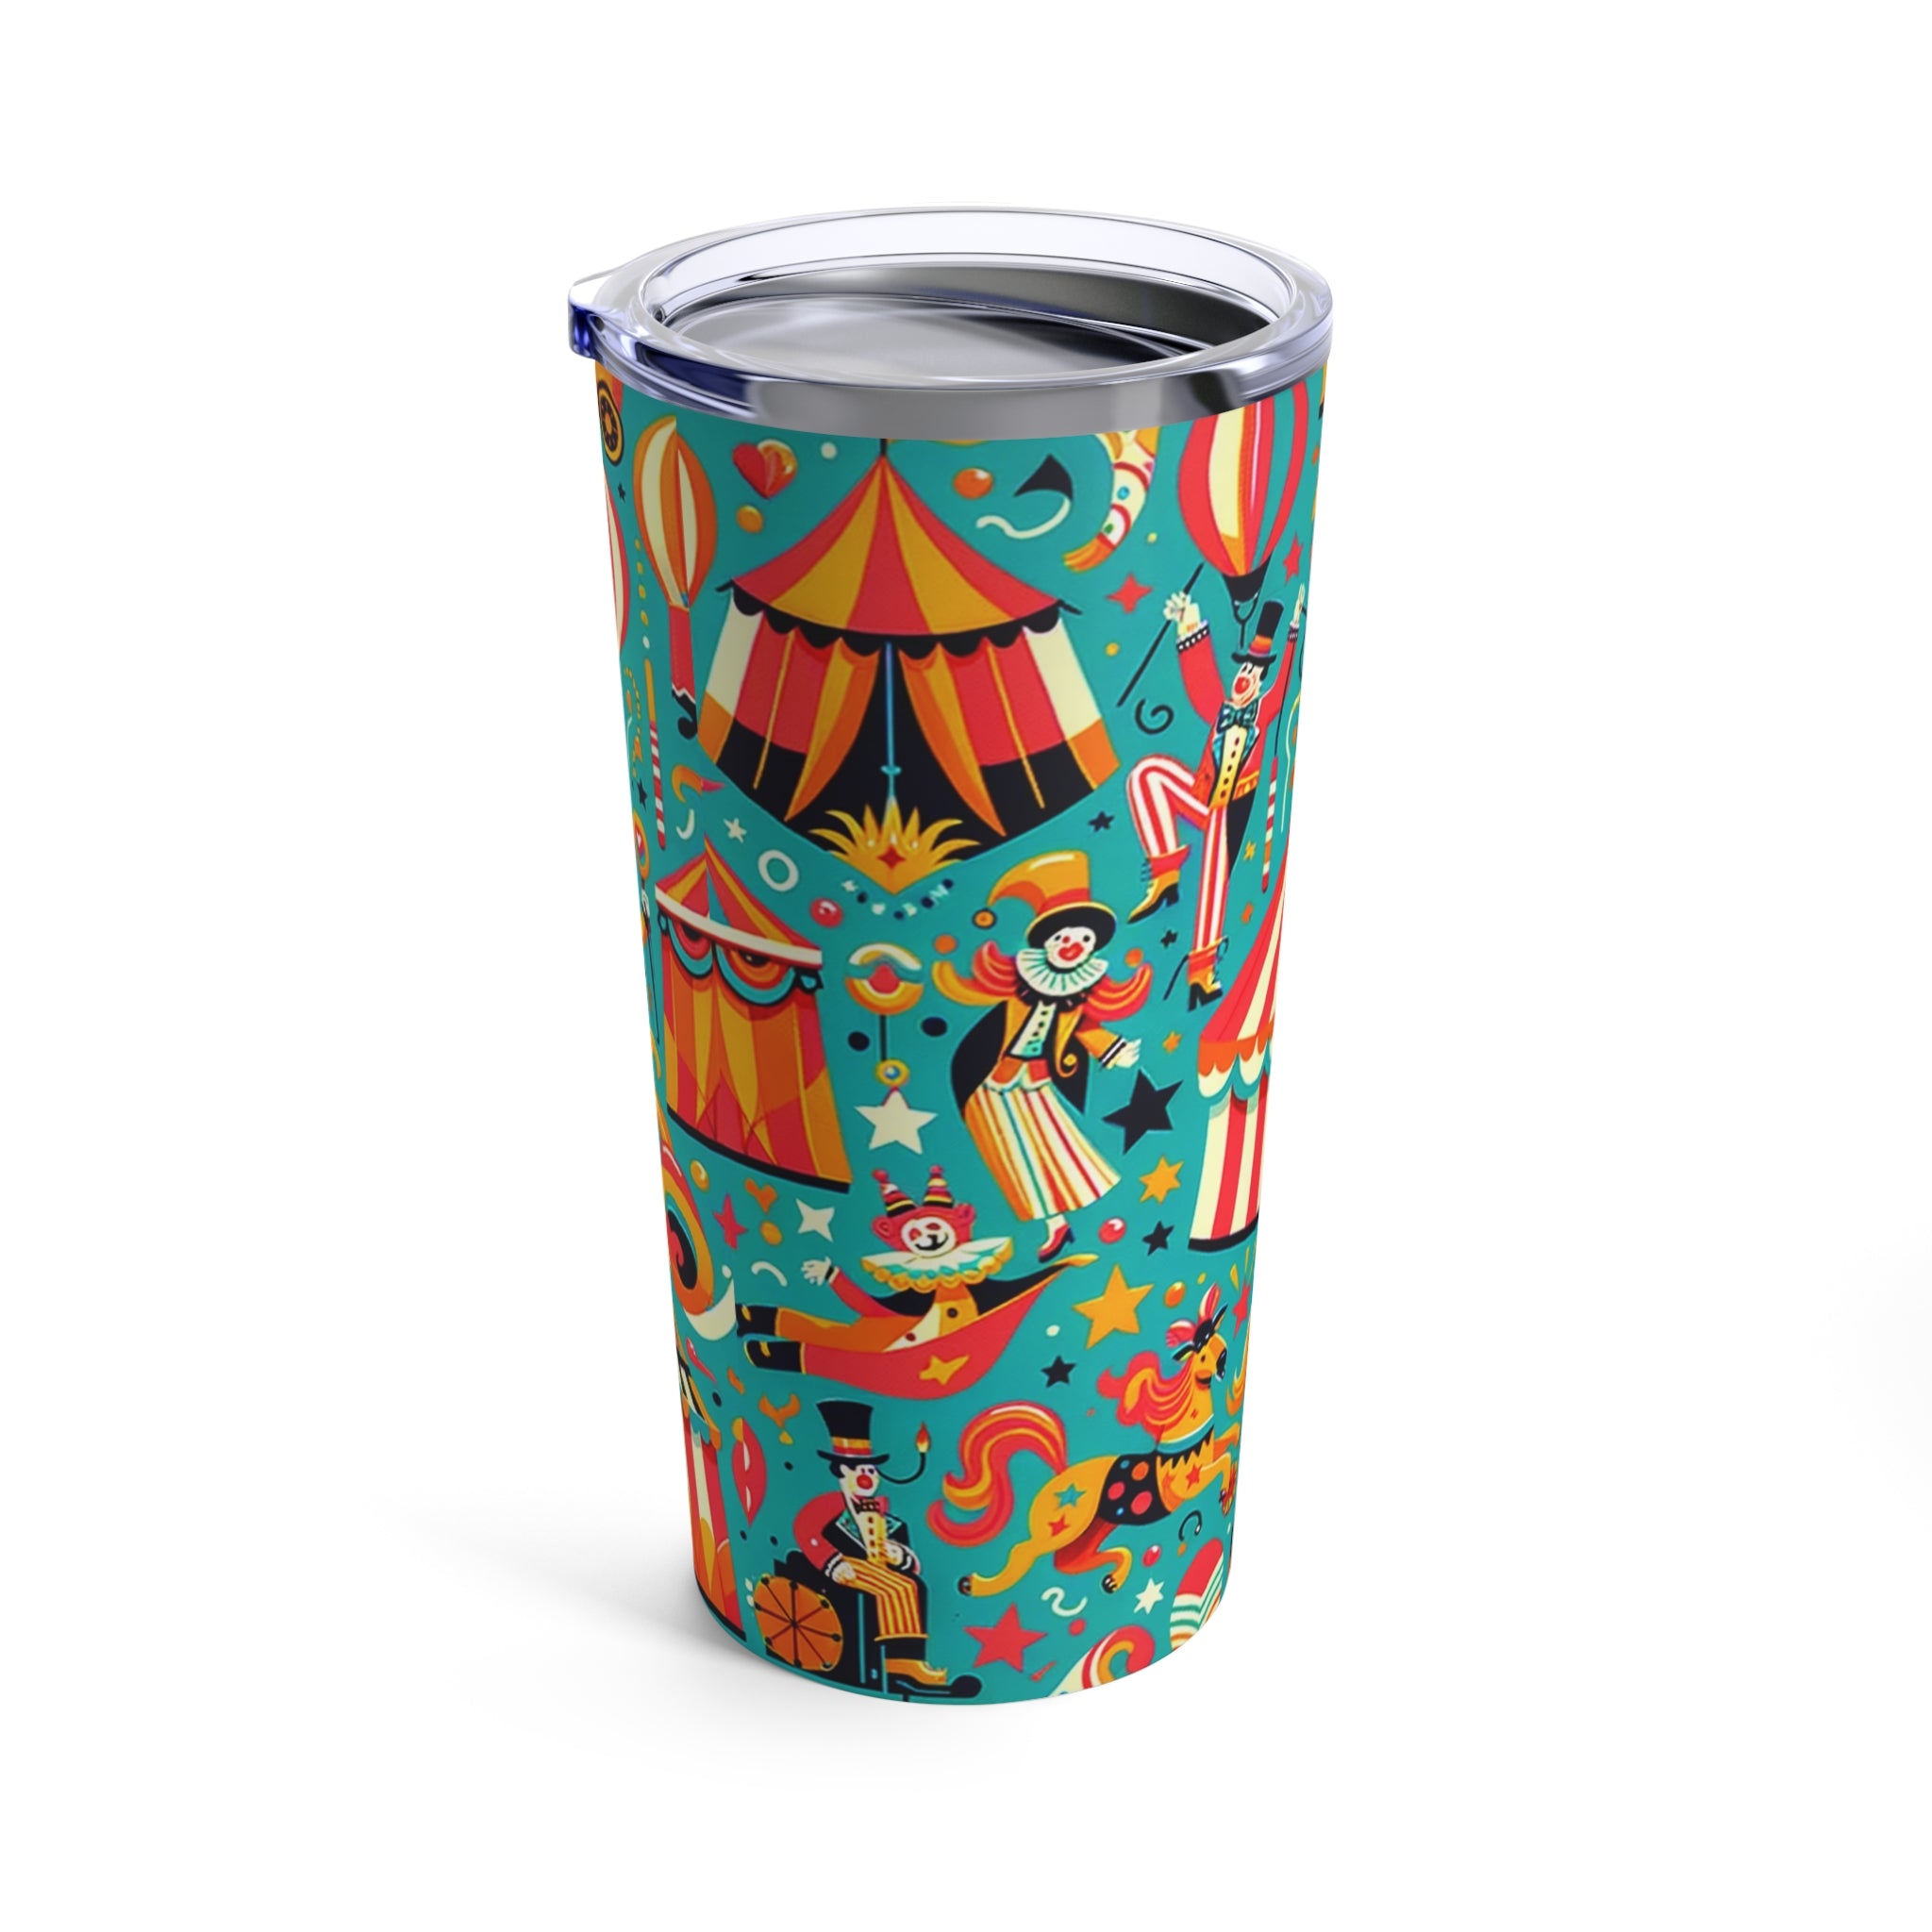 Circus Spectacle 20oz Tumbler - Whimsical and Colorful Circus Theme